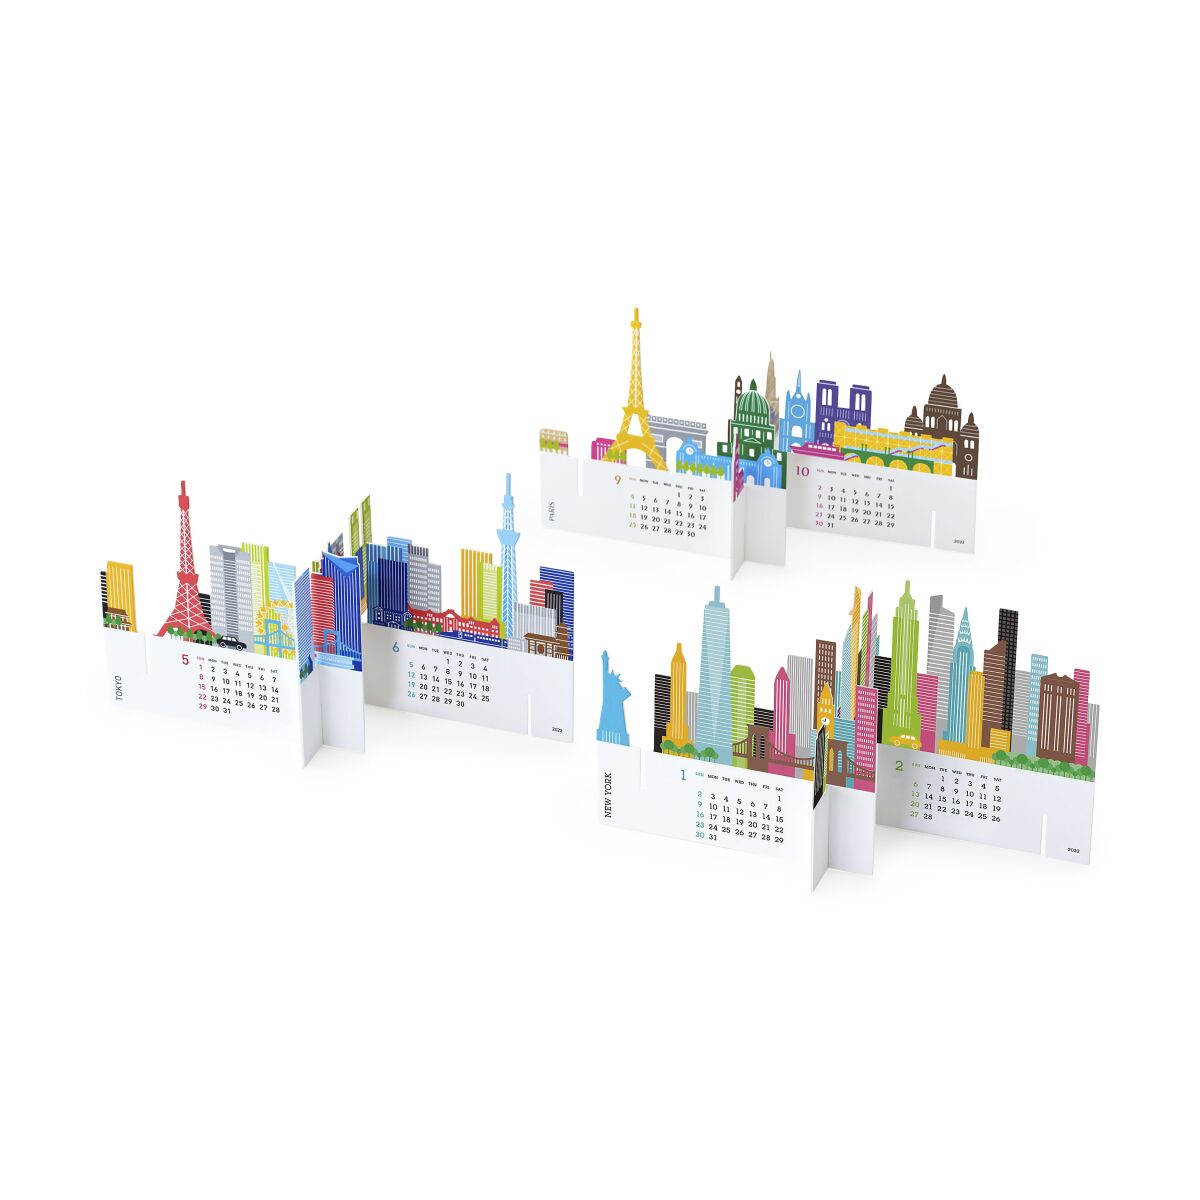 This image provided by MoMA Design Store shows a city landscape calendar. A great-looking desk calendar offered at MoMA from Japanese studio Good Morning features 3D cityscapes of Tokyo, New York and Paris. Interlock the shapes on the provided display stand to showcase the 12 monthly calendars and the skylines. (MoMa Design Store via AP)